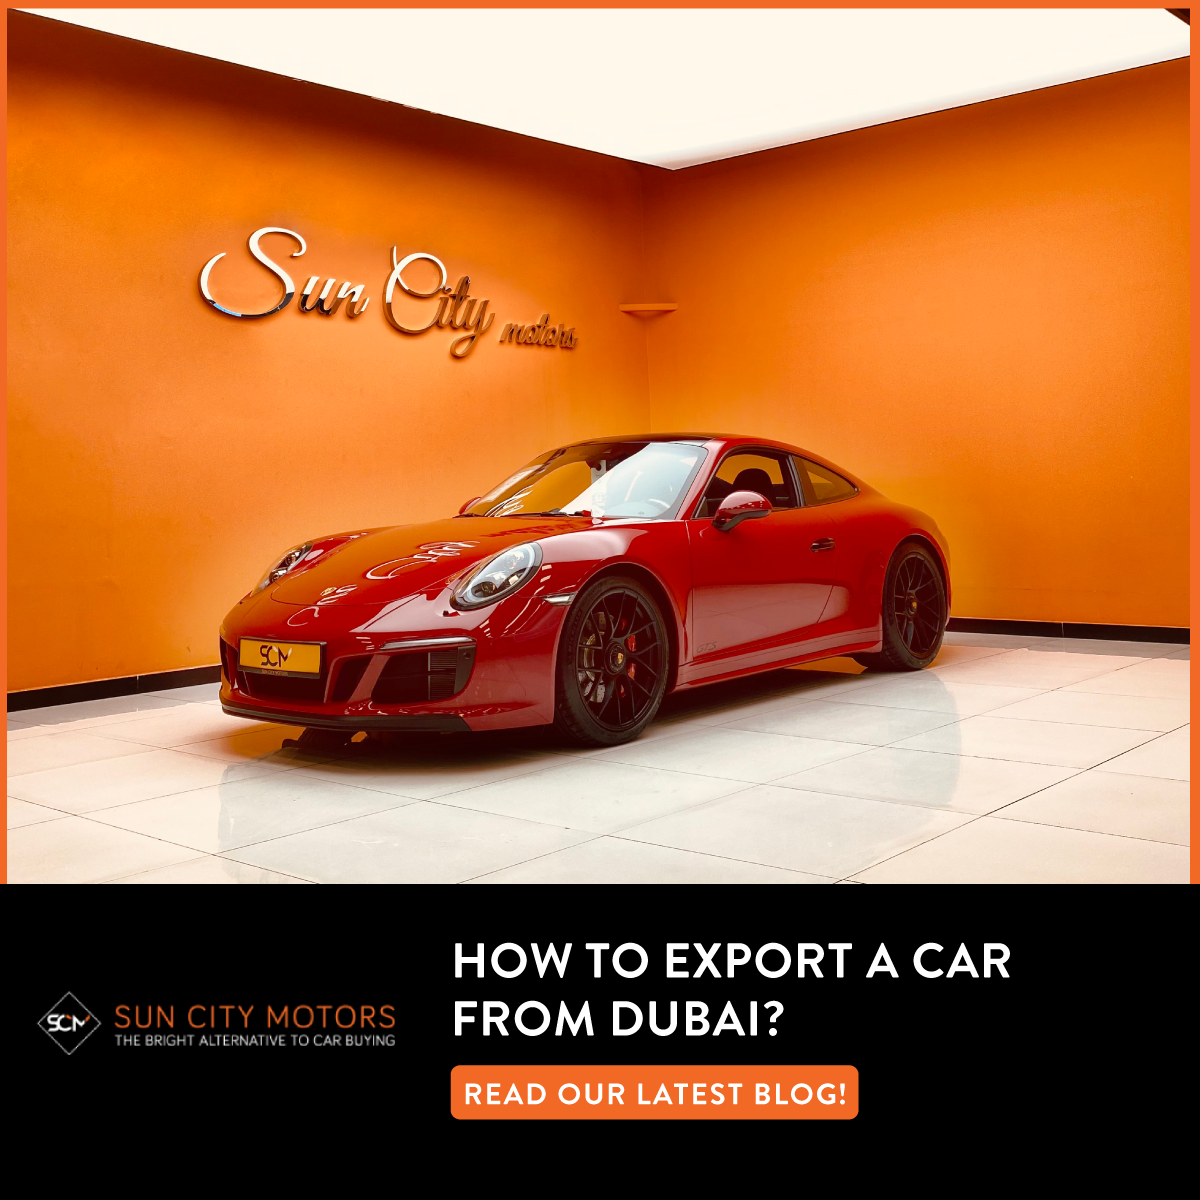 How to export a car from Dubai?